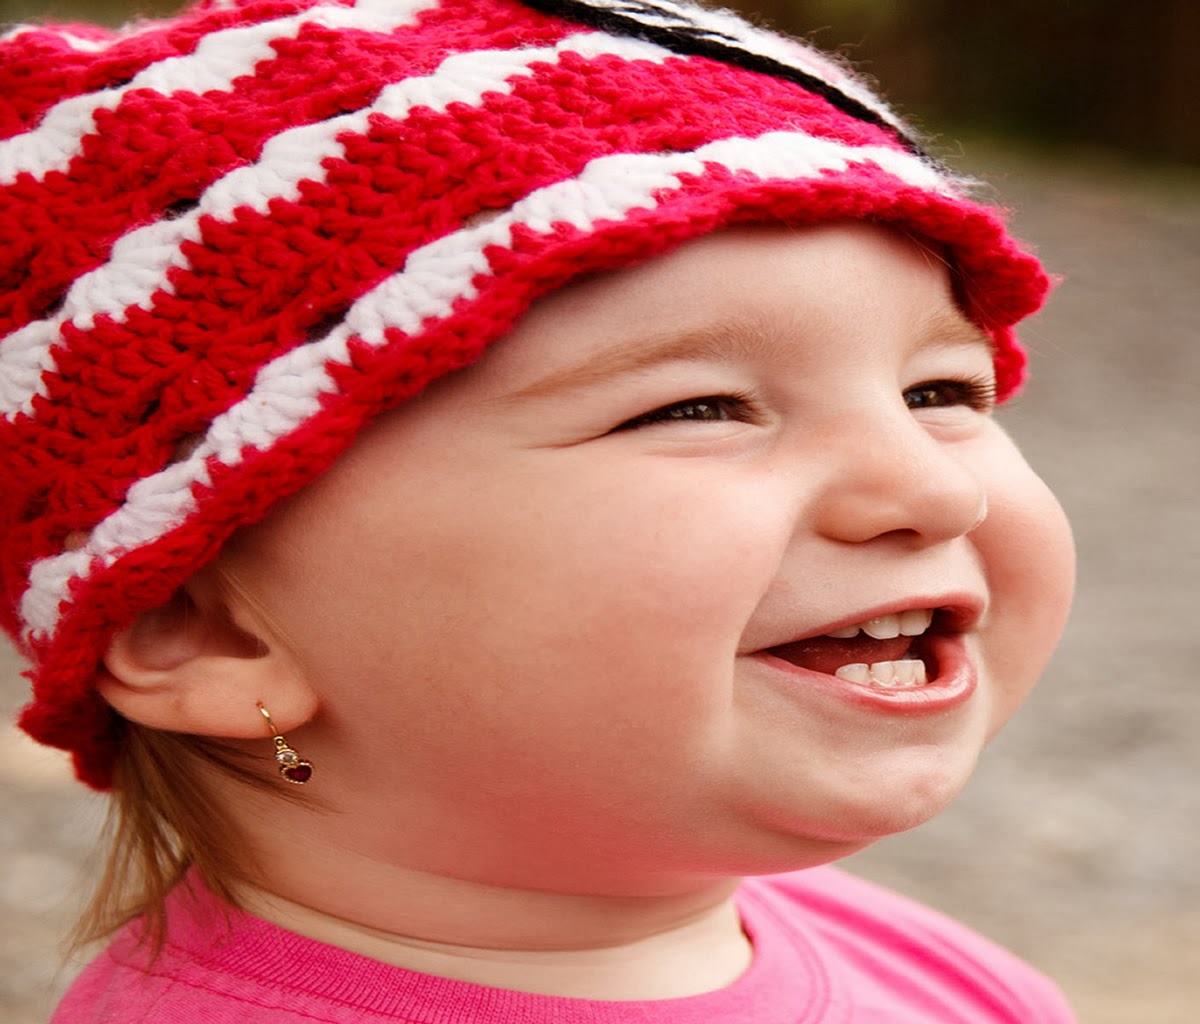 baby doll wallpaper free download,child,beanie,facial expression,knit cap,clothing